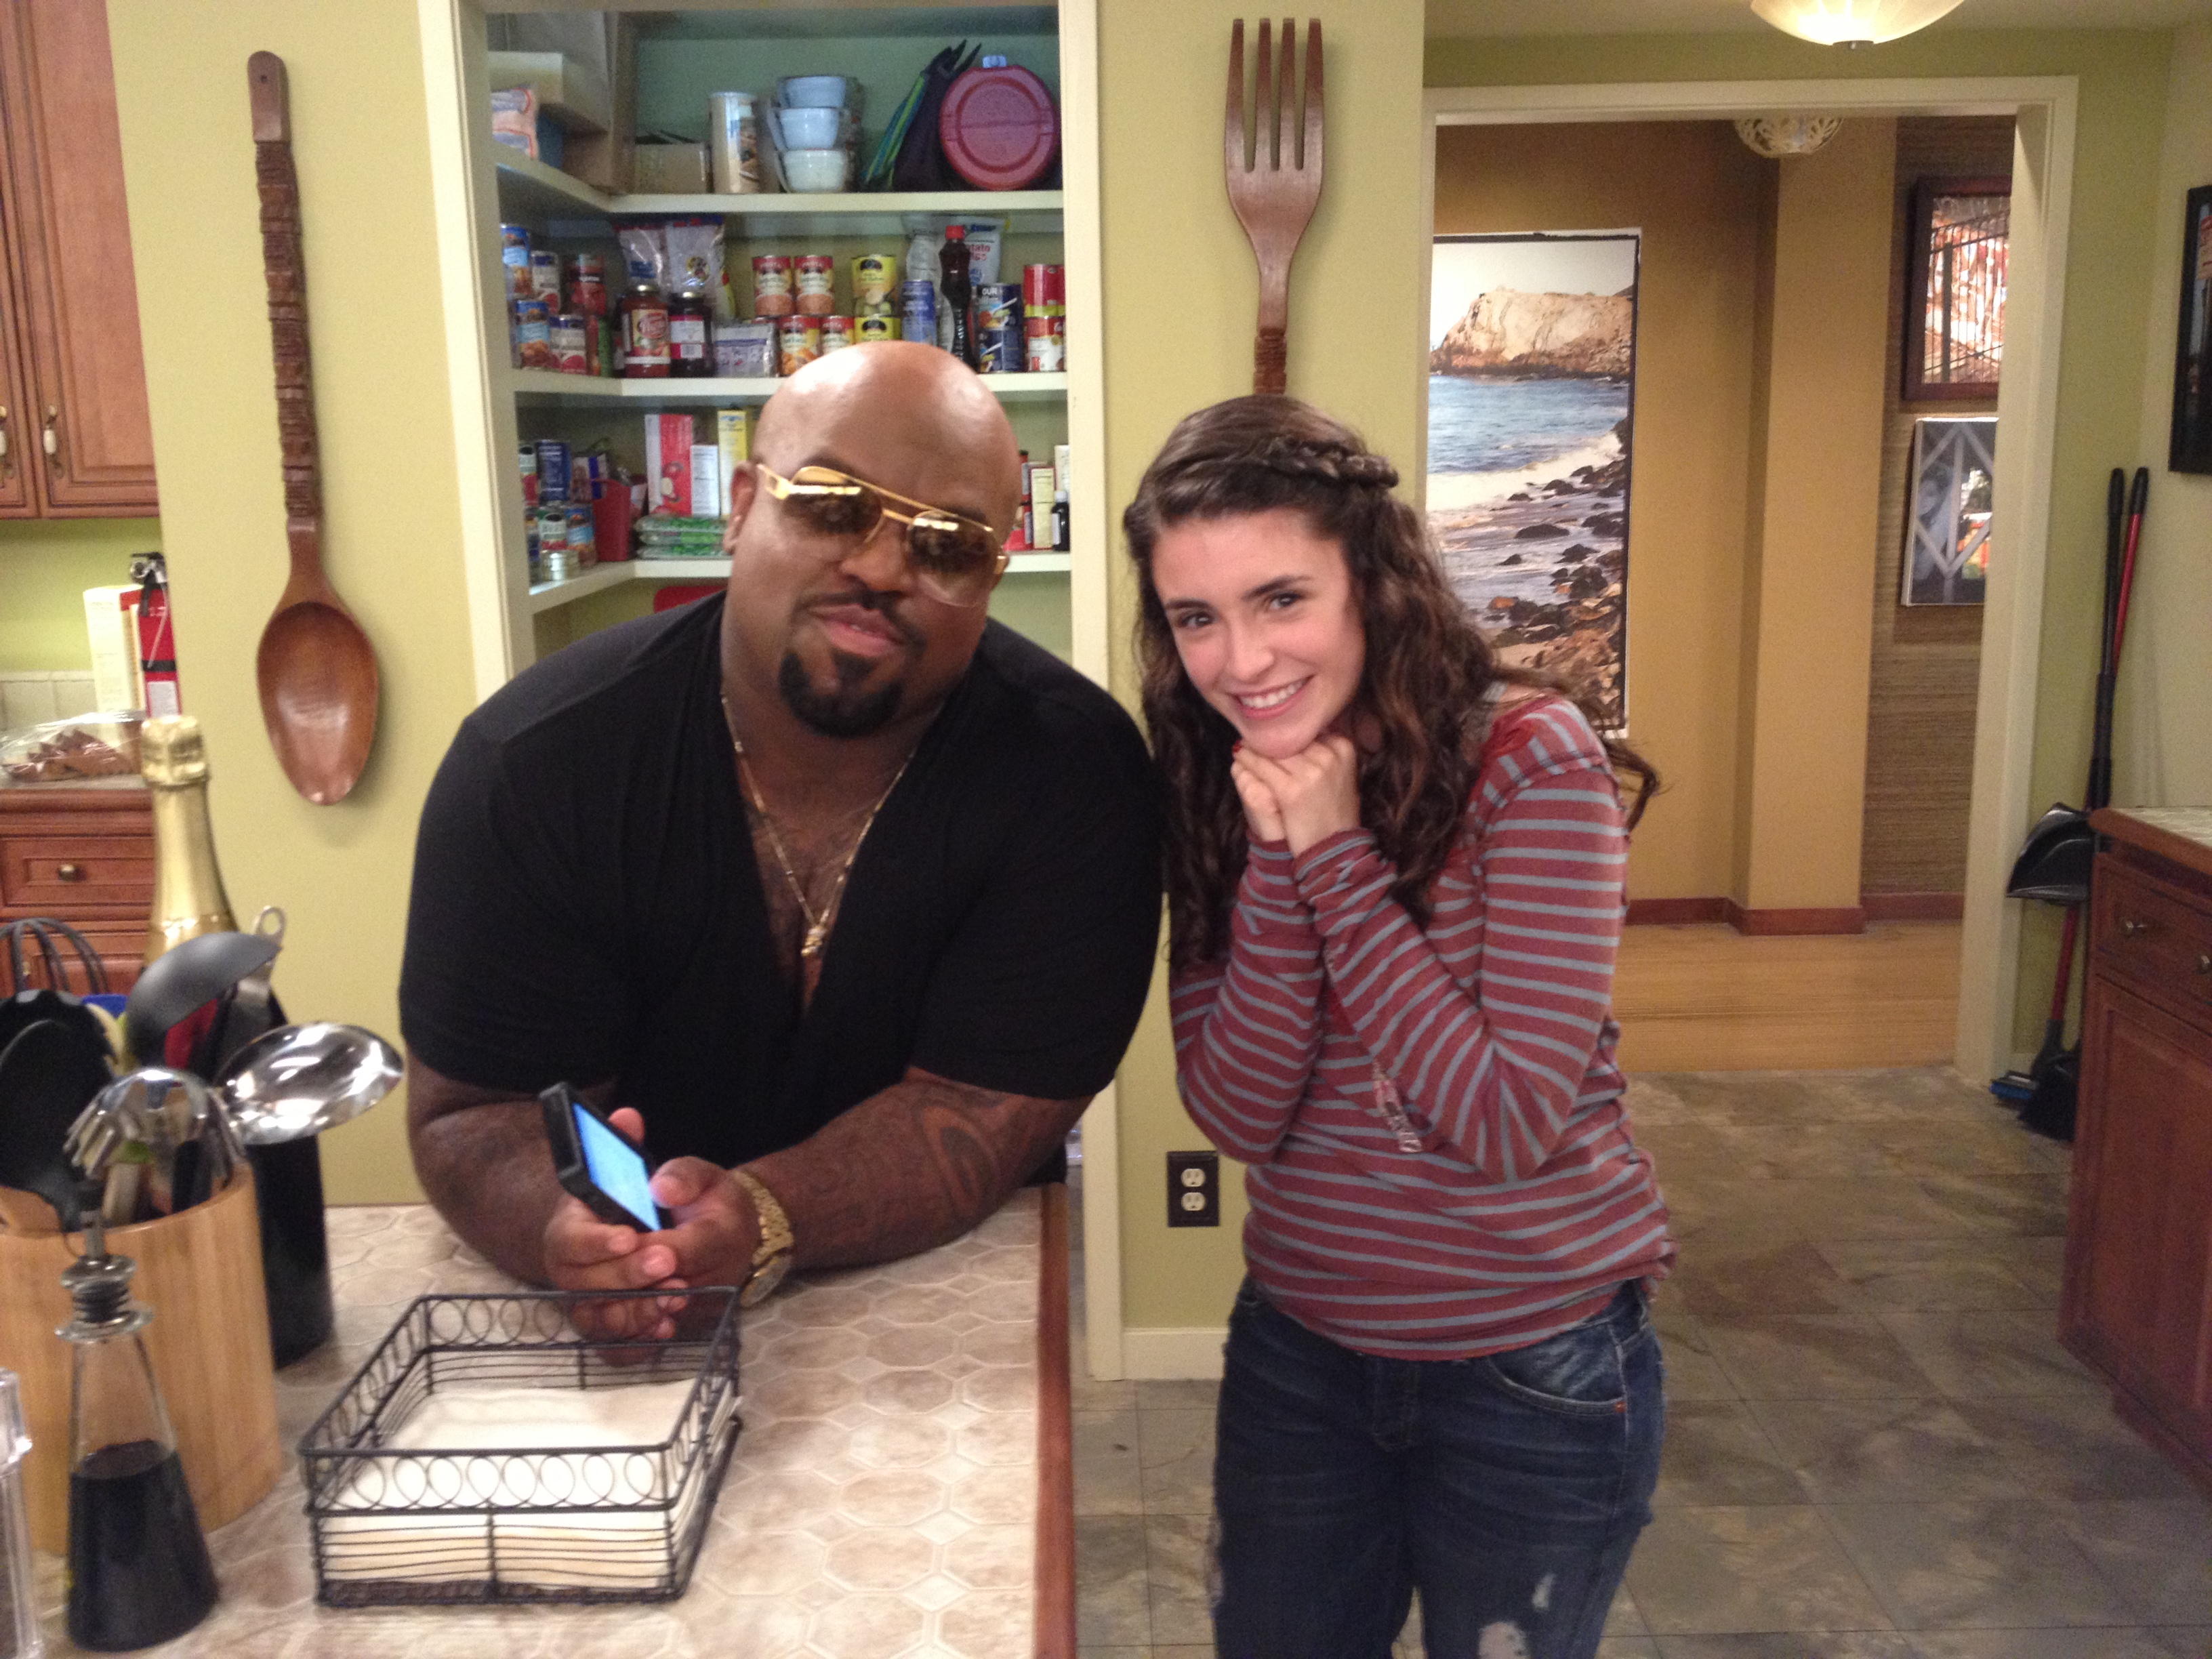 Cee Lo Green and Daniela Bobadilla on the set of FX's ANGER MANAGEMENT